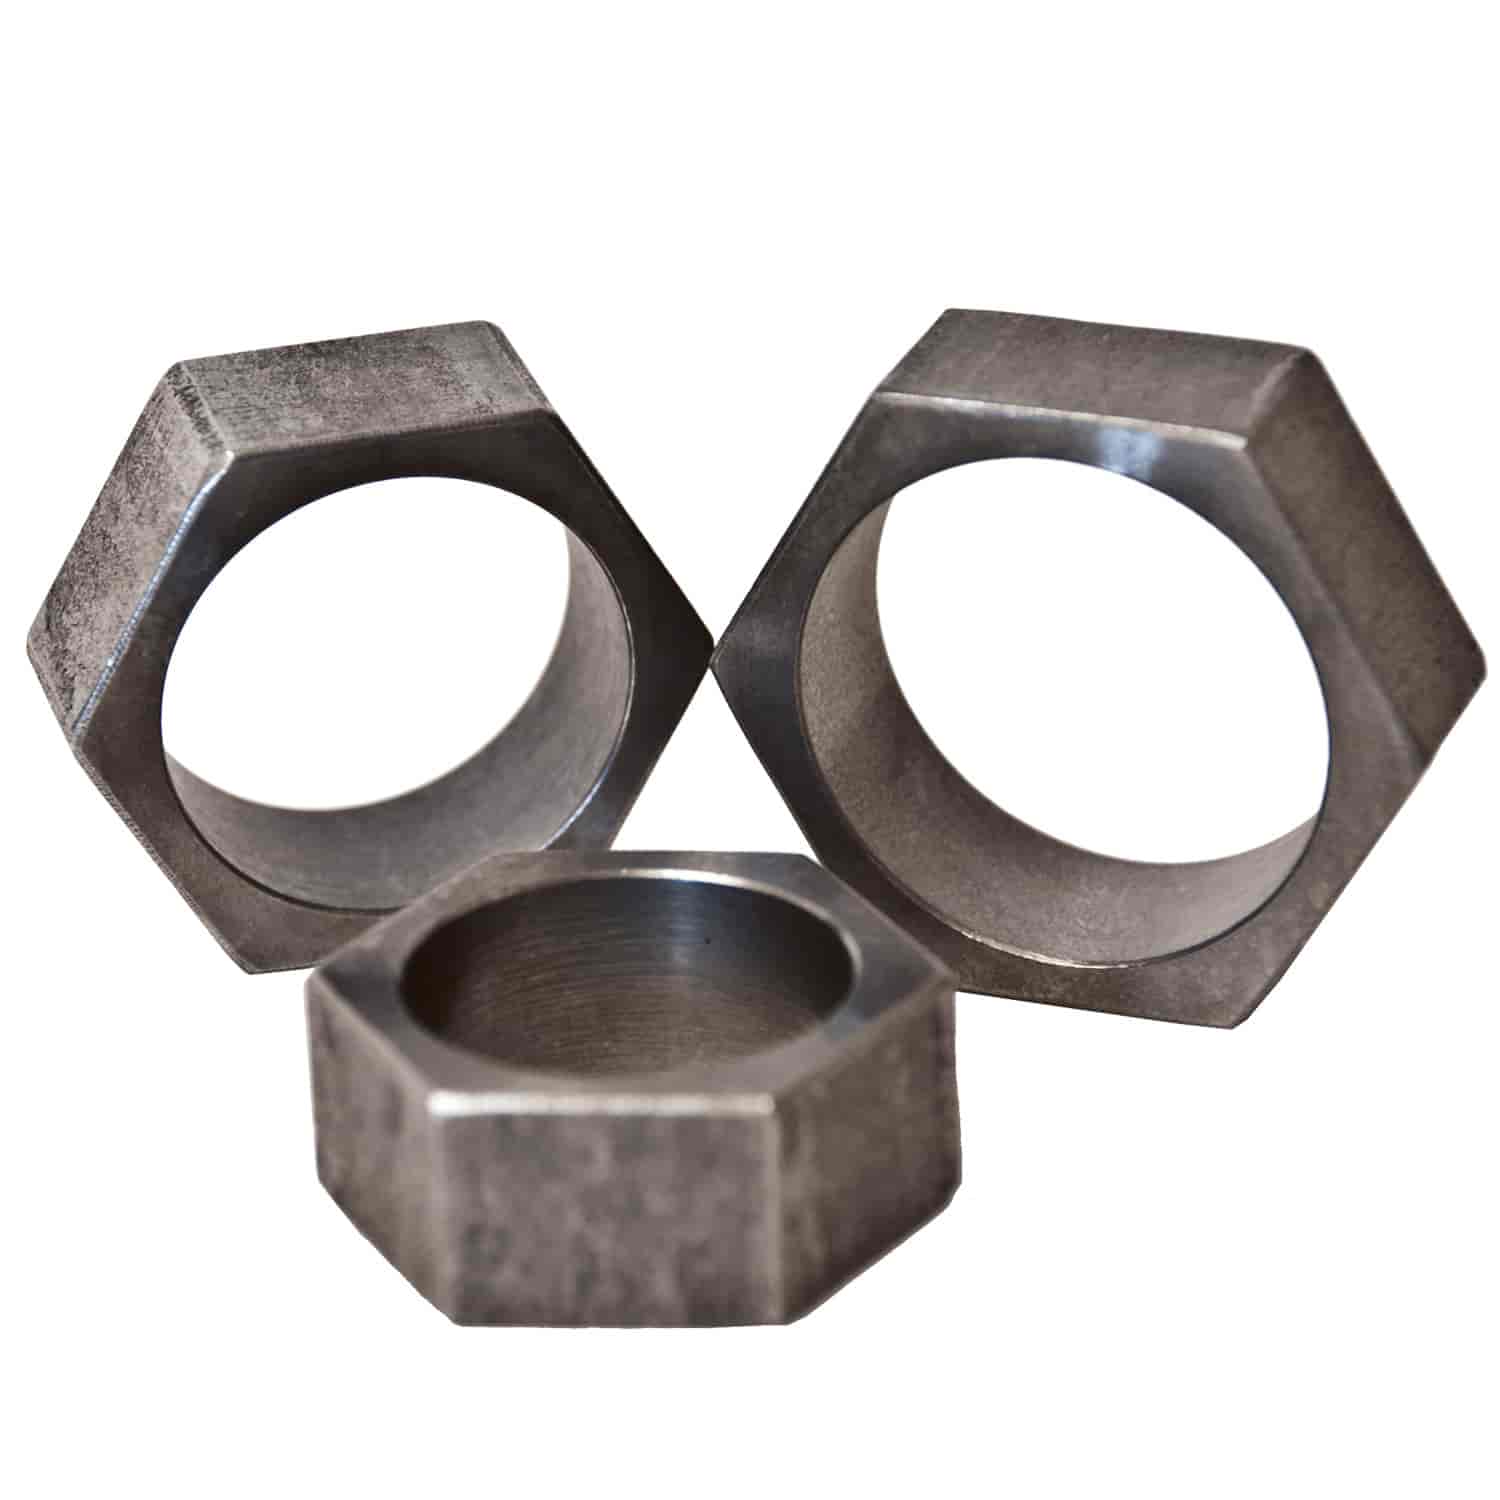 Weld On Wrench Hex For 5/8" OD Tubing